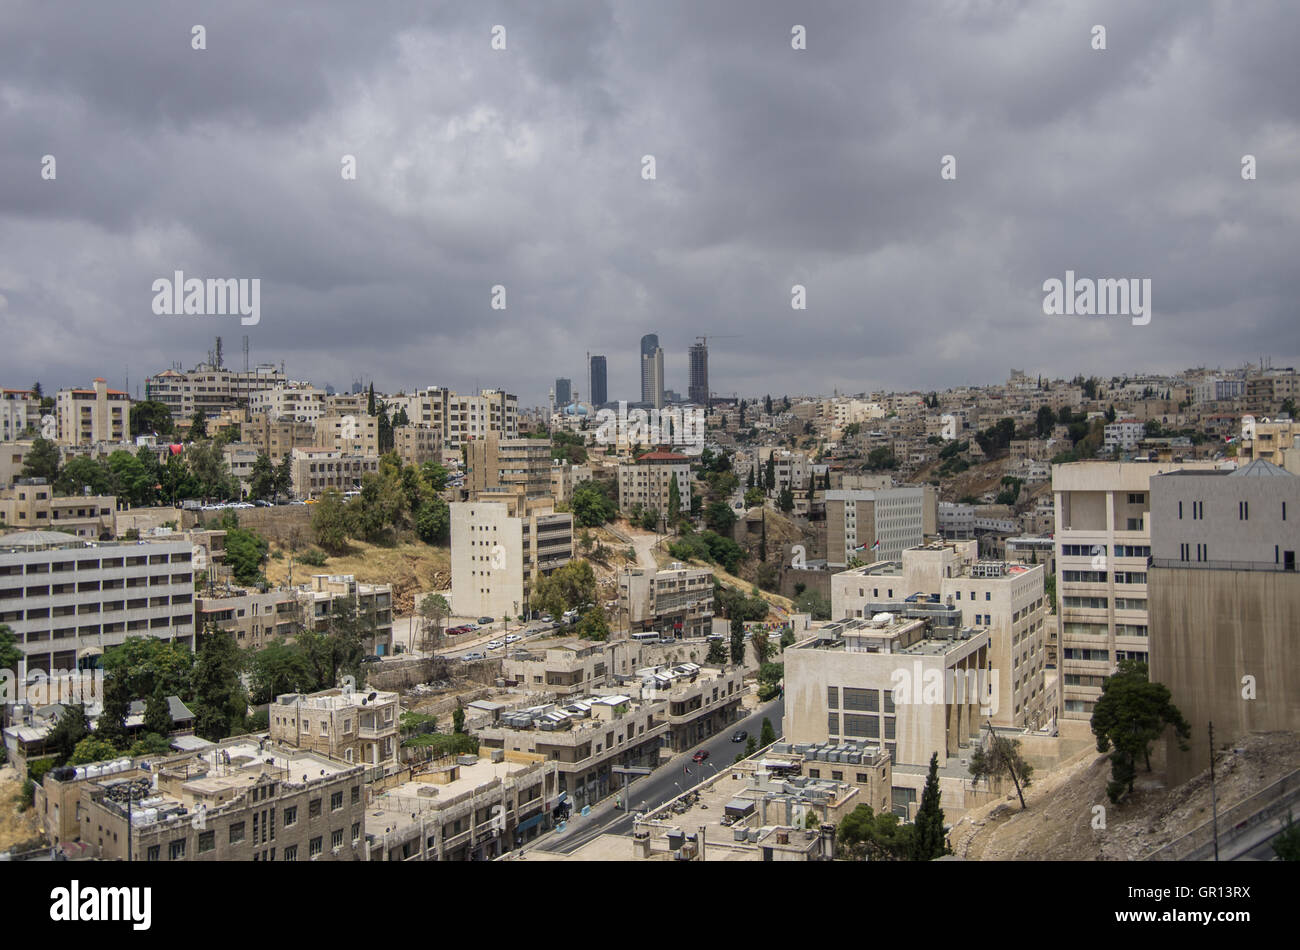 Cityscape of Amman downtown with skyscrapers at background, Jordan Stock Photo